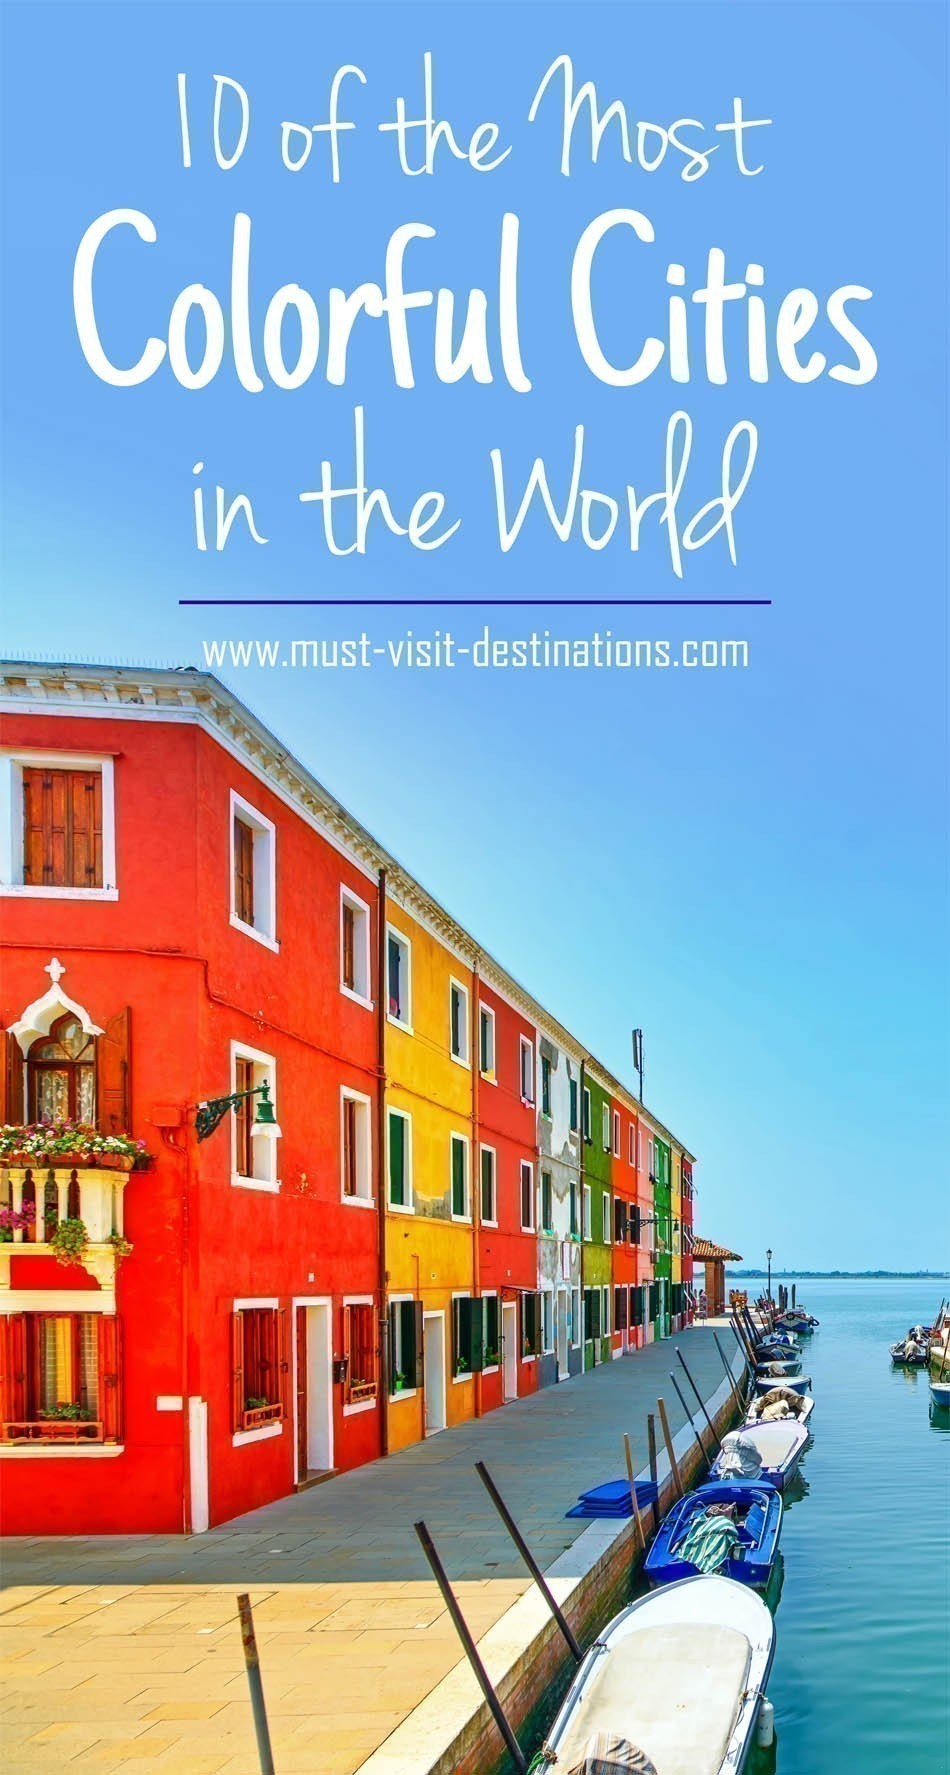 10 of the Most Colorful Cities in the World #travel 